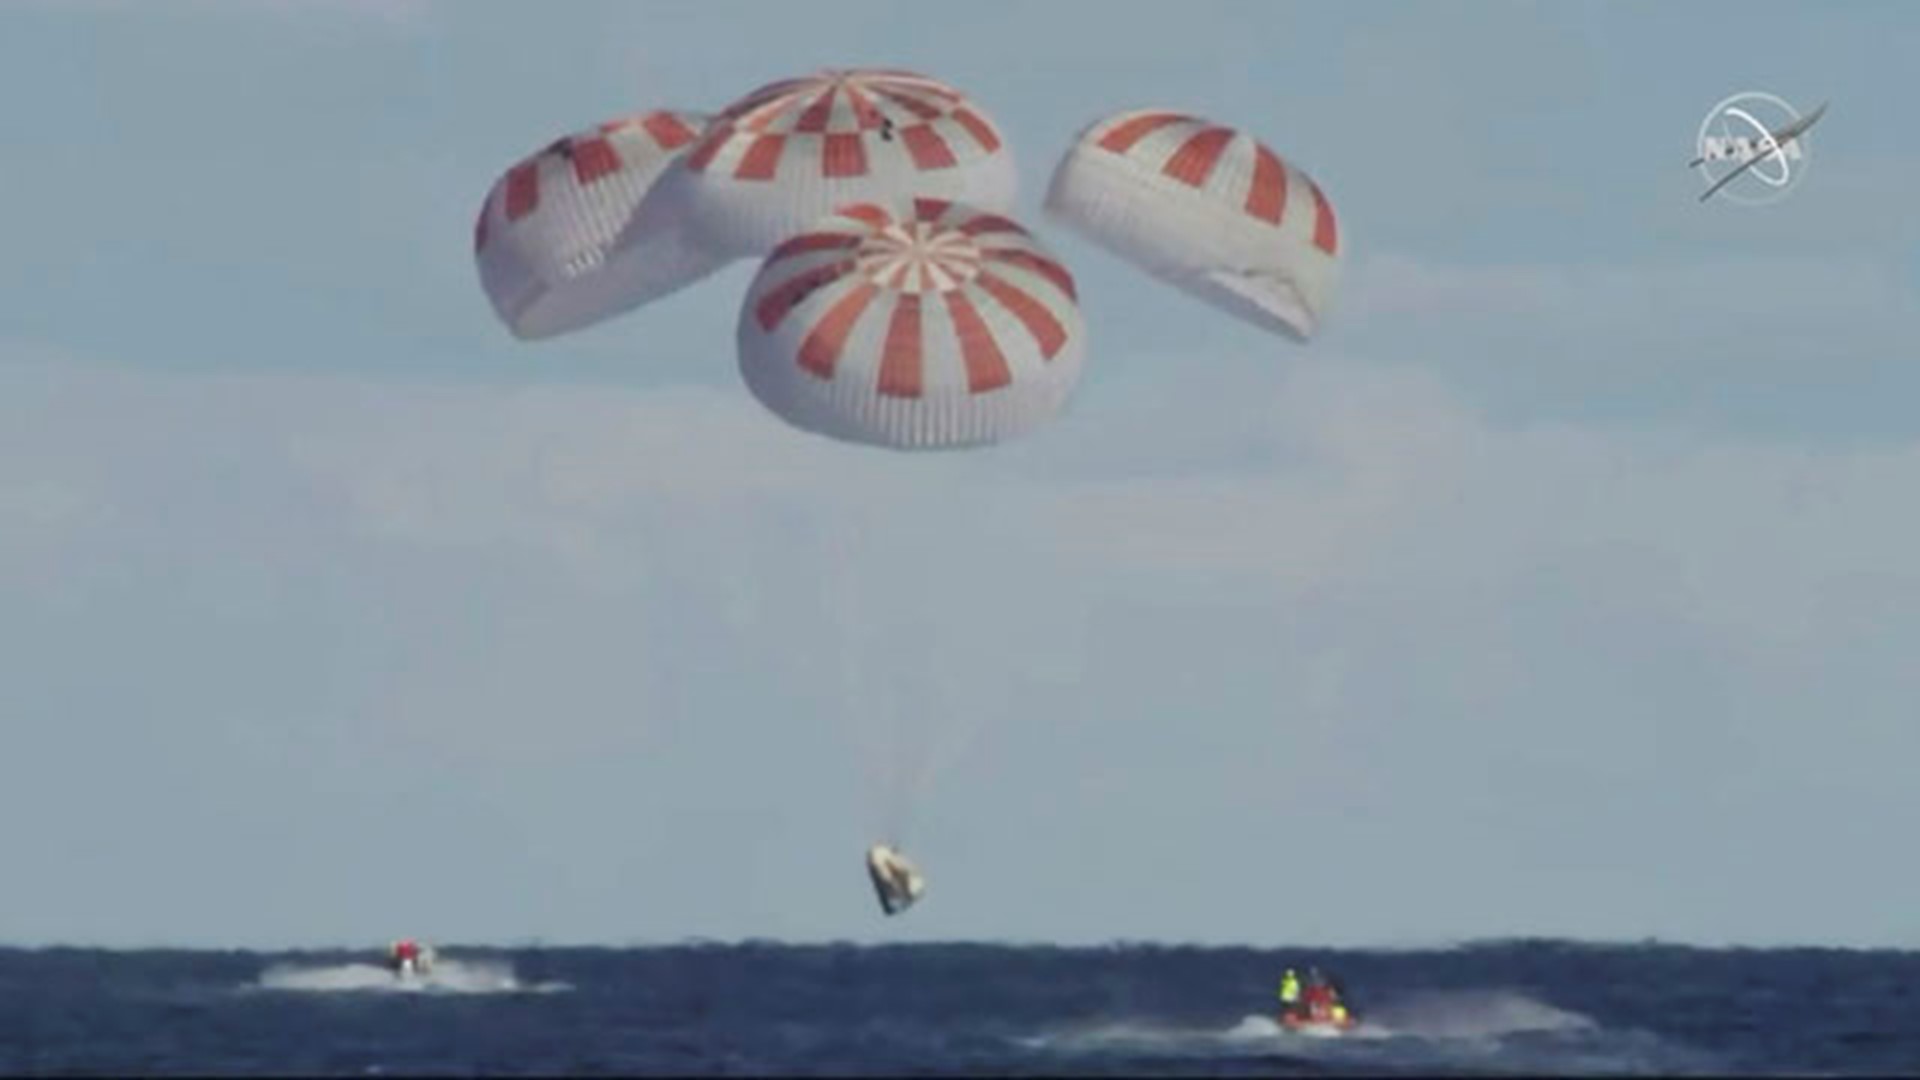 NASA provided amazing video of the SpaceX splashdown, starting with parachute deployment shortly after the capsule enters the Earth's atmosphere.